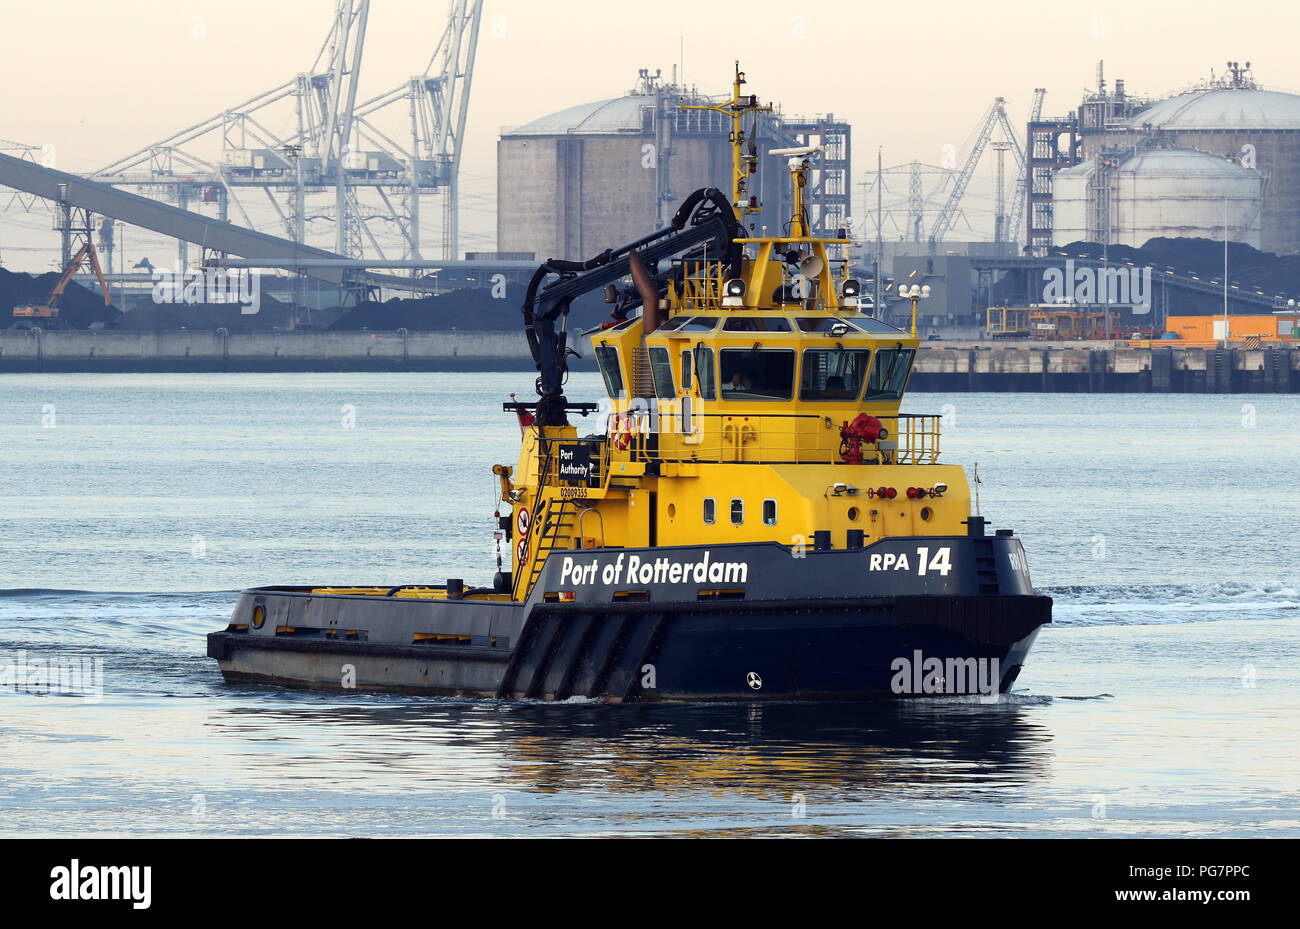 The patrol boat RPA 14 operates on 27 July 2018 in the port of Rotterdam. Stock Photo